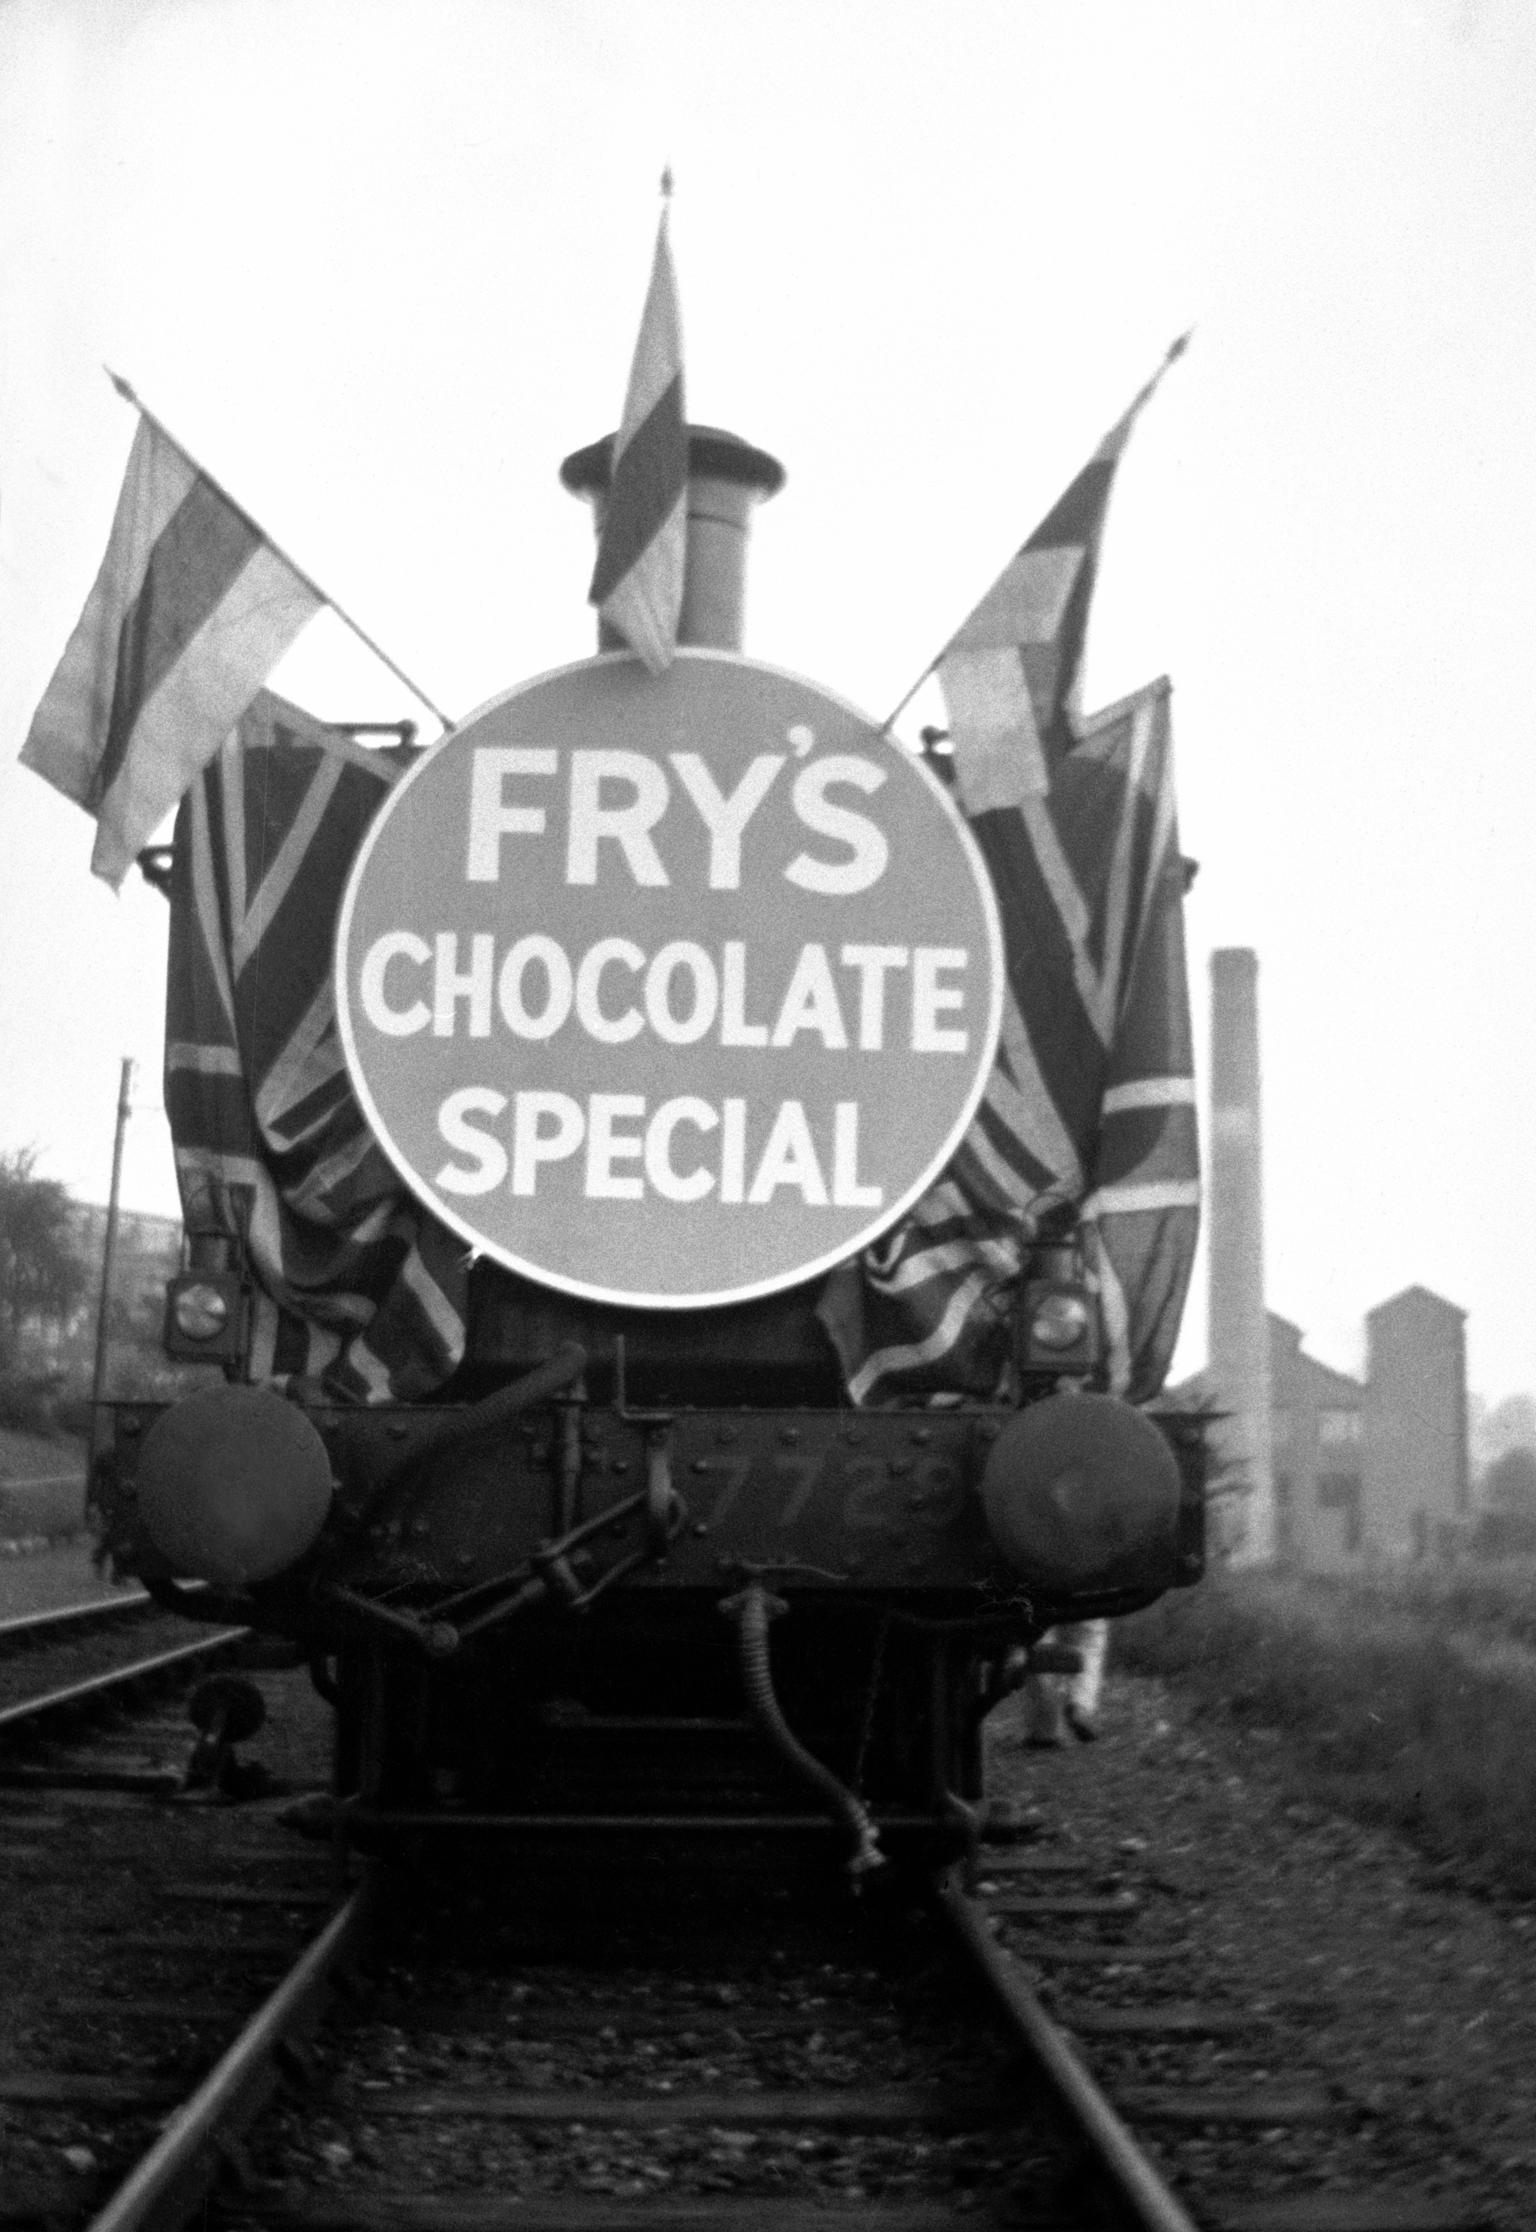 Fry's chocolate special show train, negative